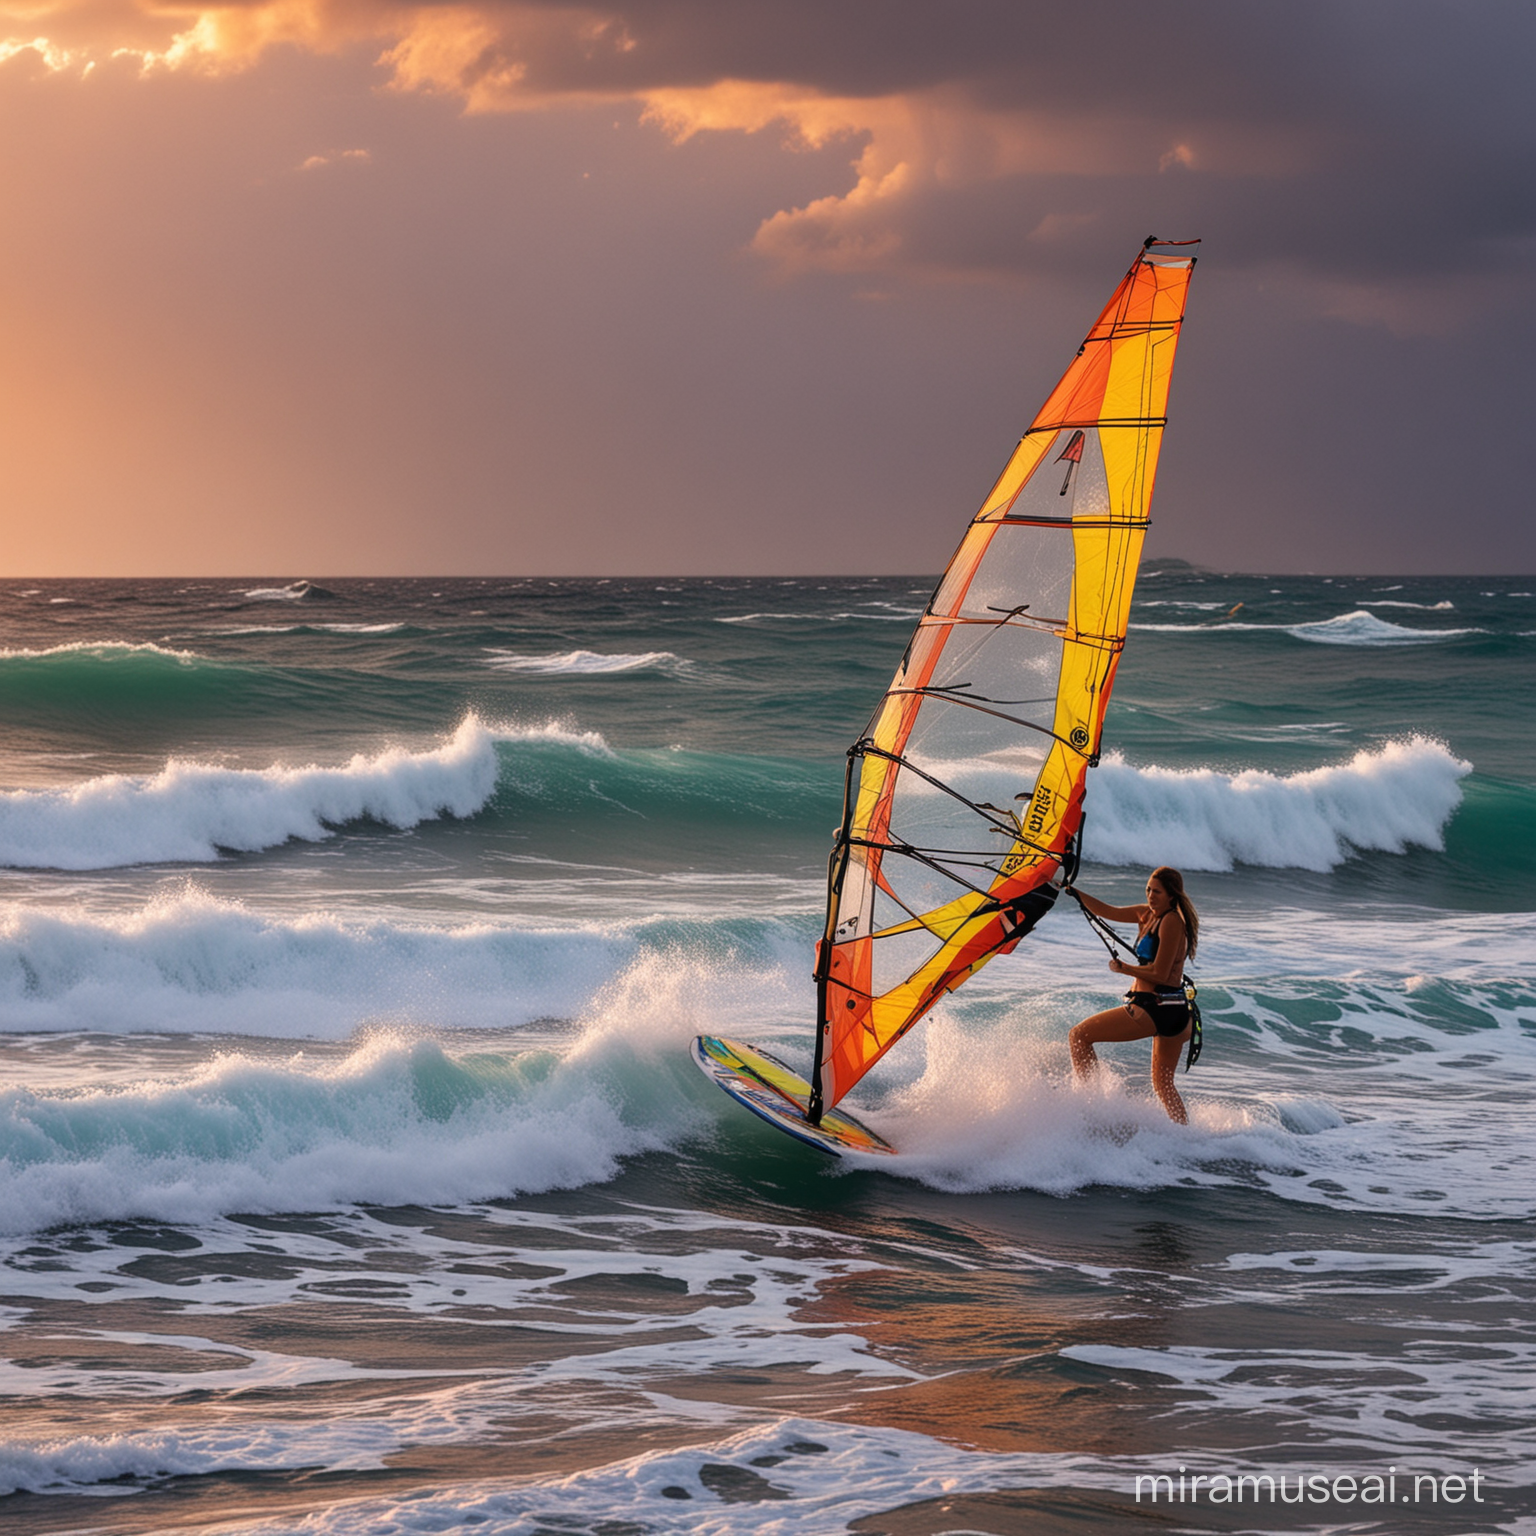 Nice girl windsurfing, big waves, foam, colourfull sunset, heavy storm clouds, windy, dolphins around,